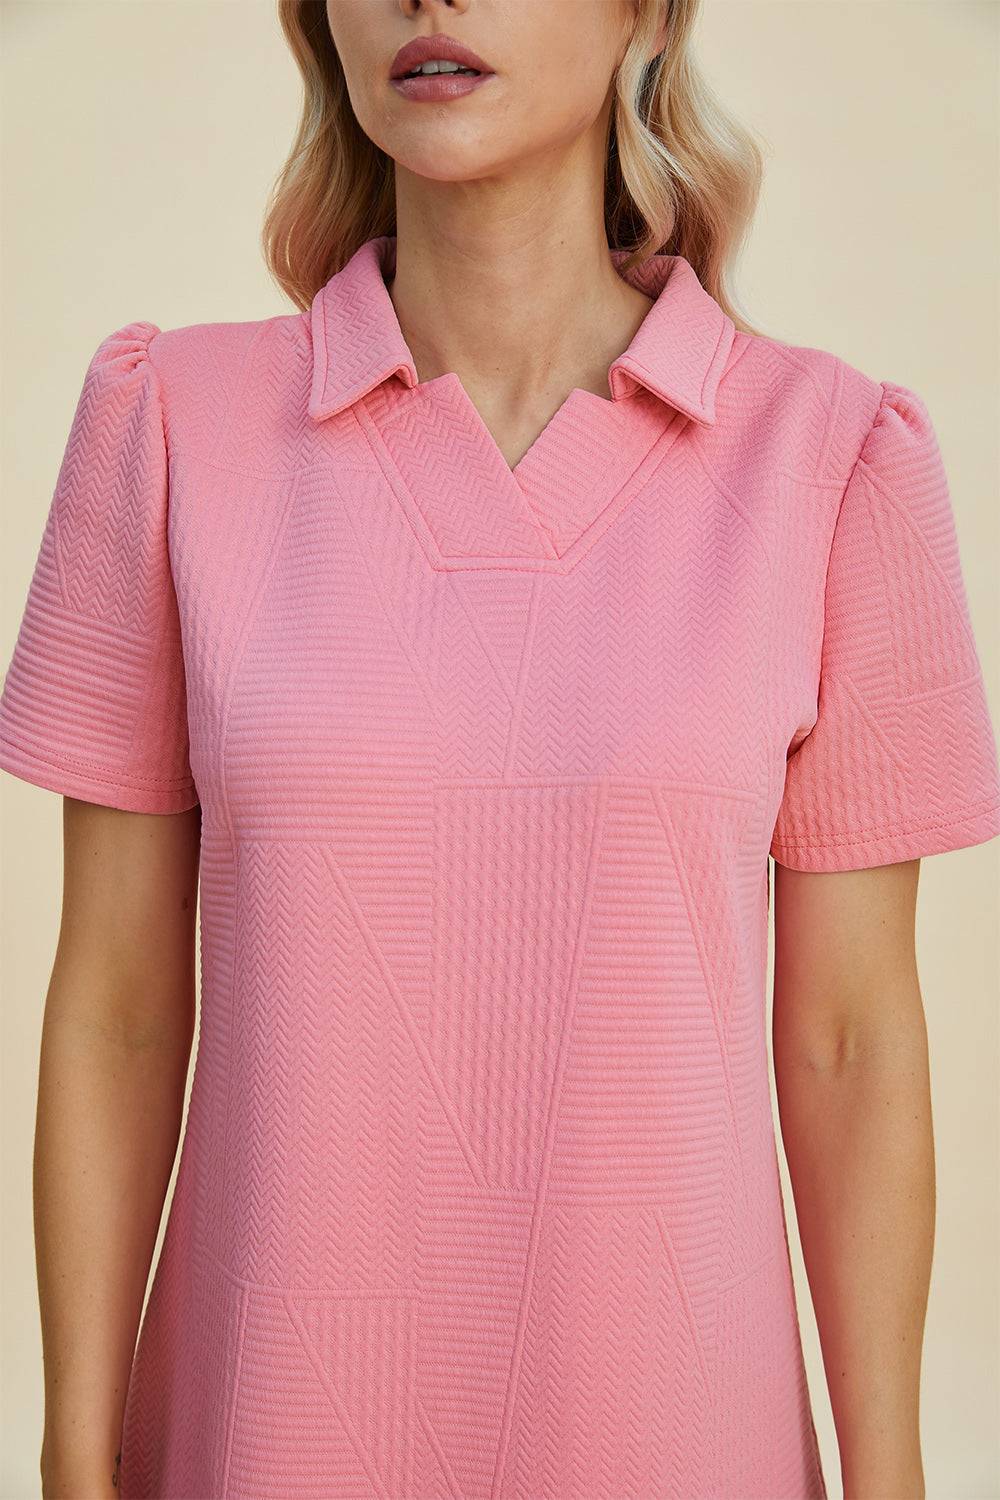 a woman wearing a pink shirt with a collar